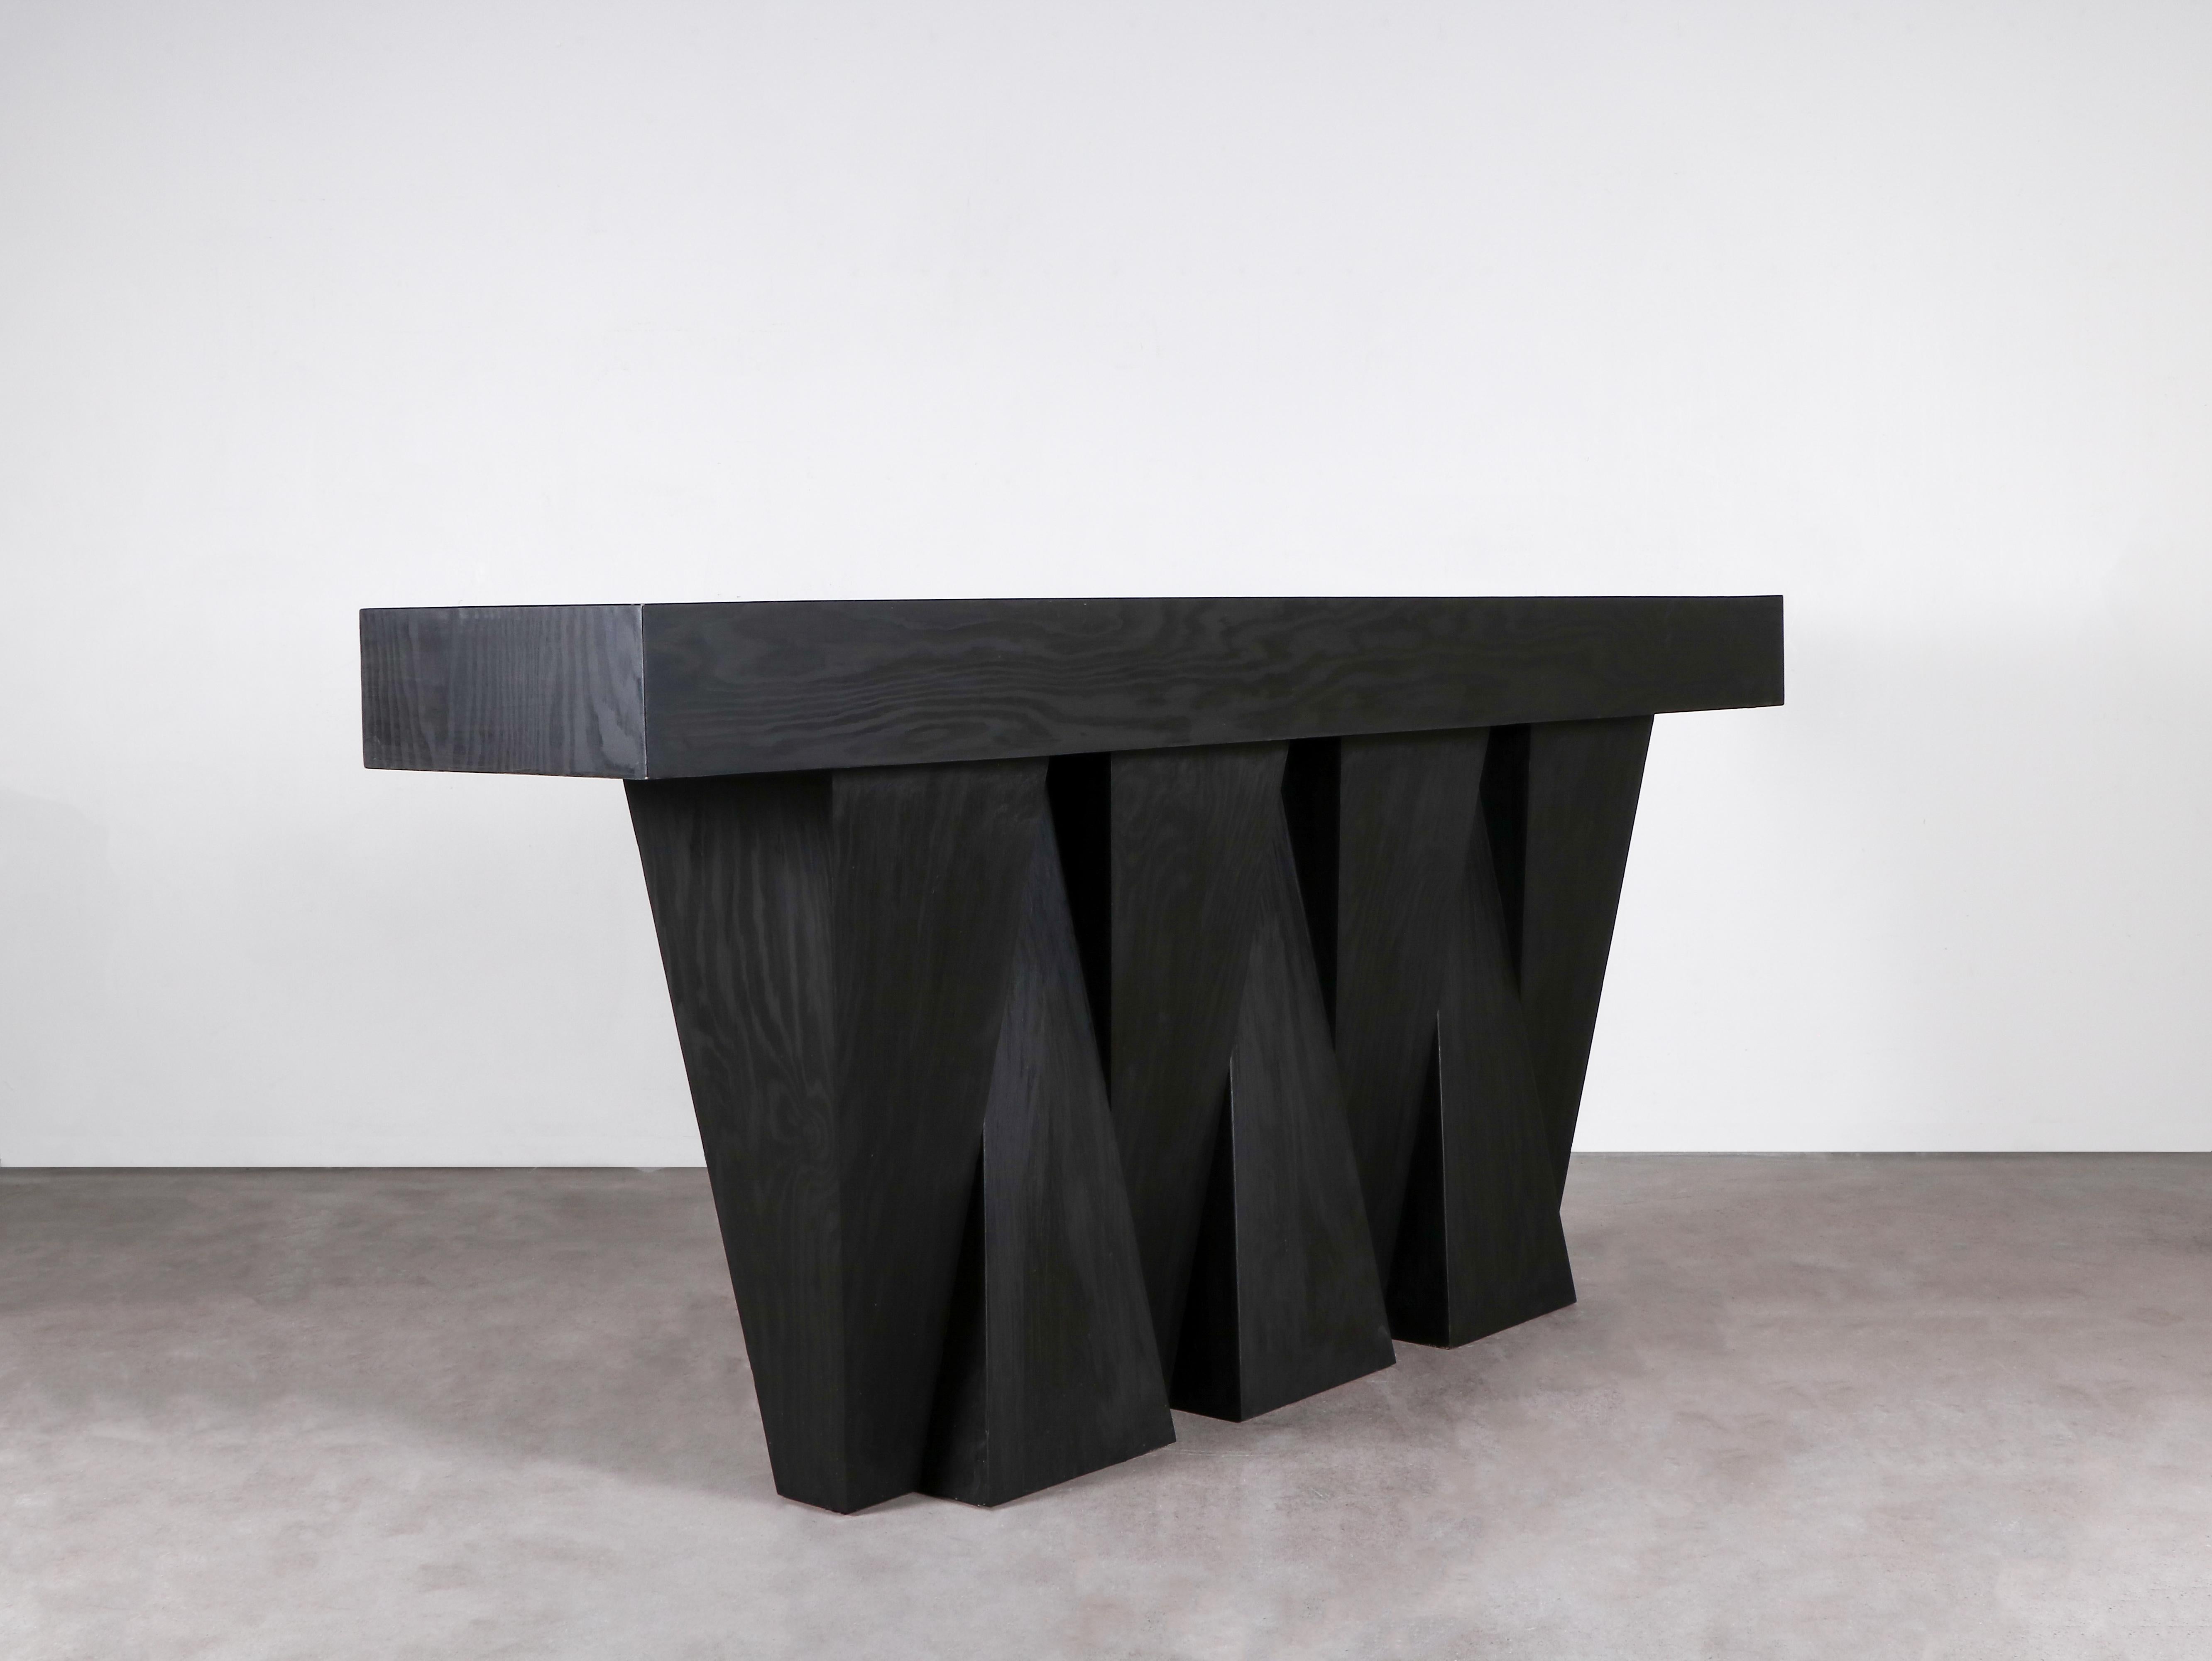 Antites console by Lucas Tyra Morten
Limited Edition of 15 + 1 AP
Signed
Dimensions: D40 x W240 x H90 cm
Material: Hand-waxed plywood

Objects comes with a 